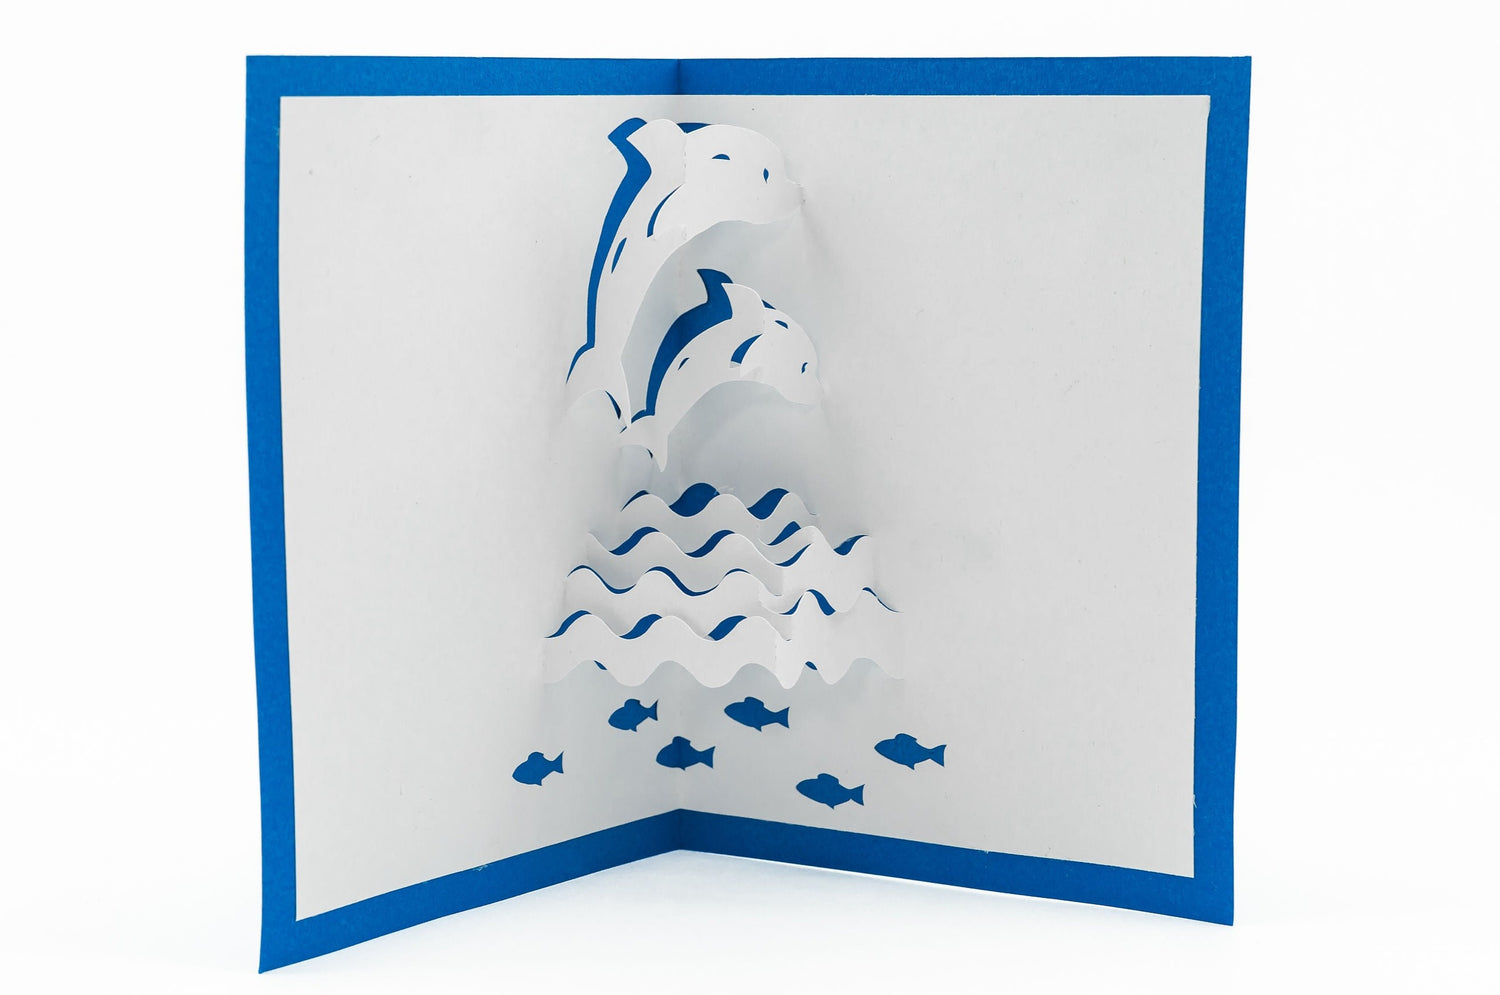 Leaping Dolphins Nautical Pop Up 3D Greeting Card